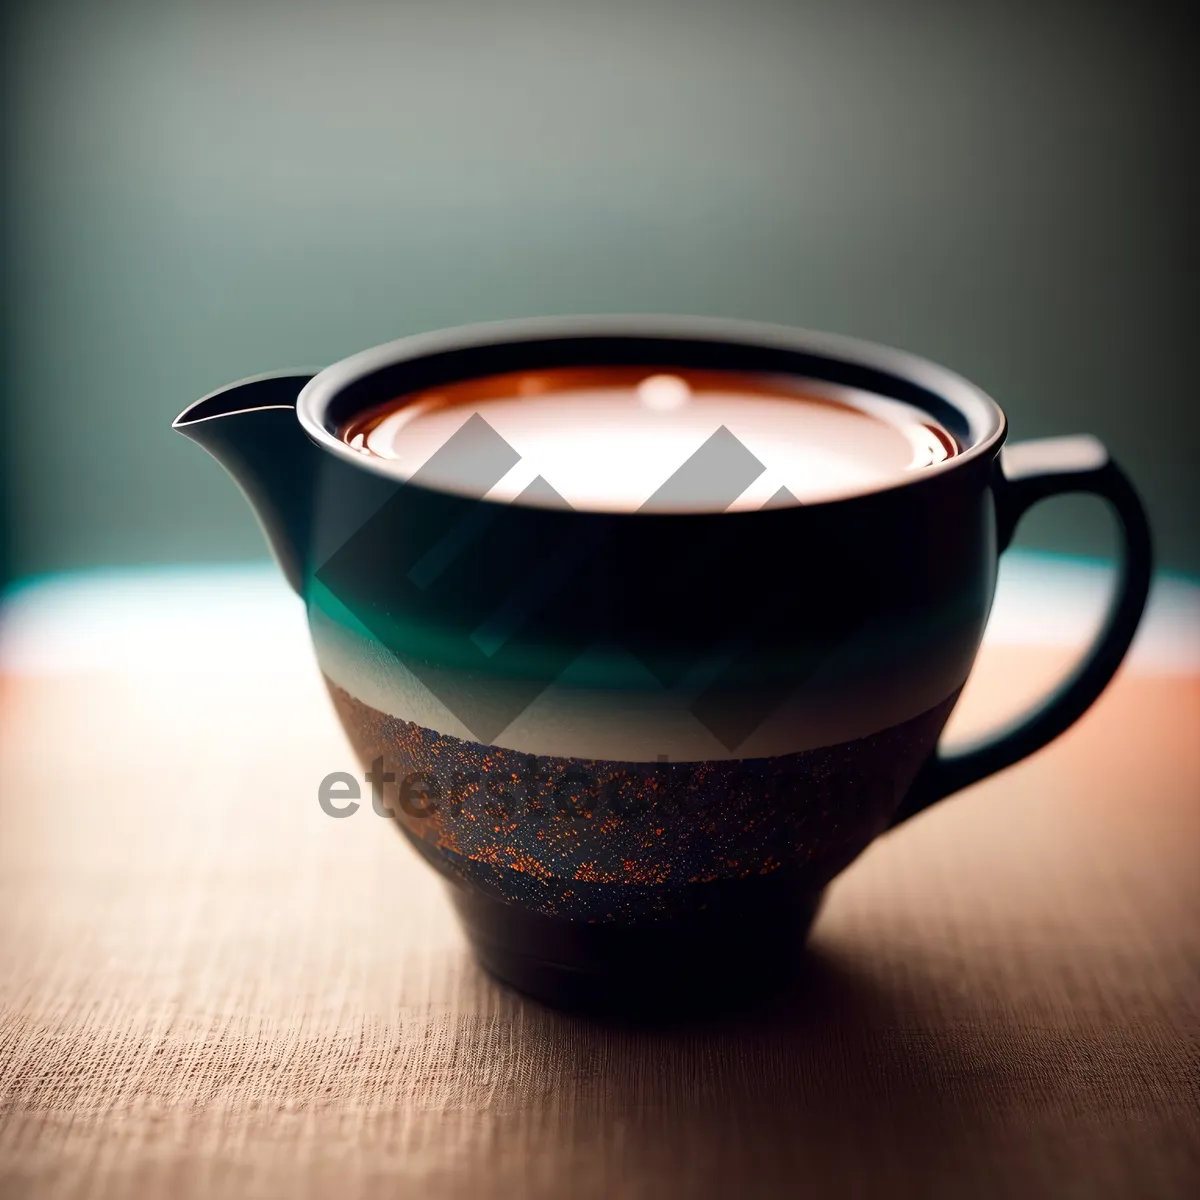 Picture of Steamy Morning Cup of Joe - Refreshing Coffee on Saucer with Spoon